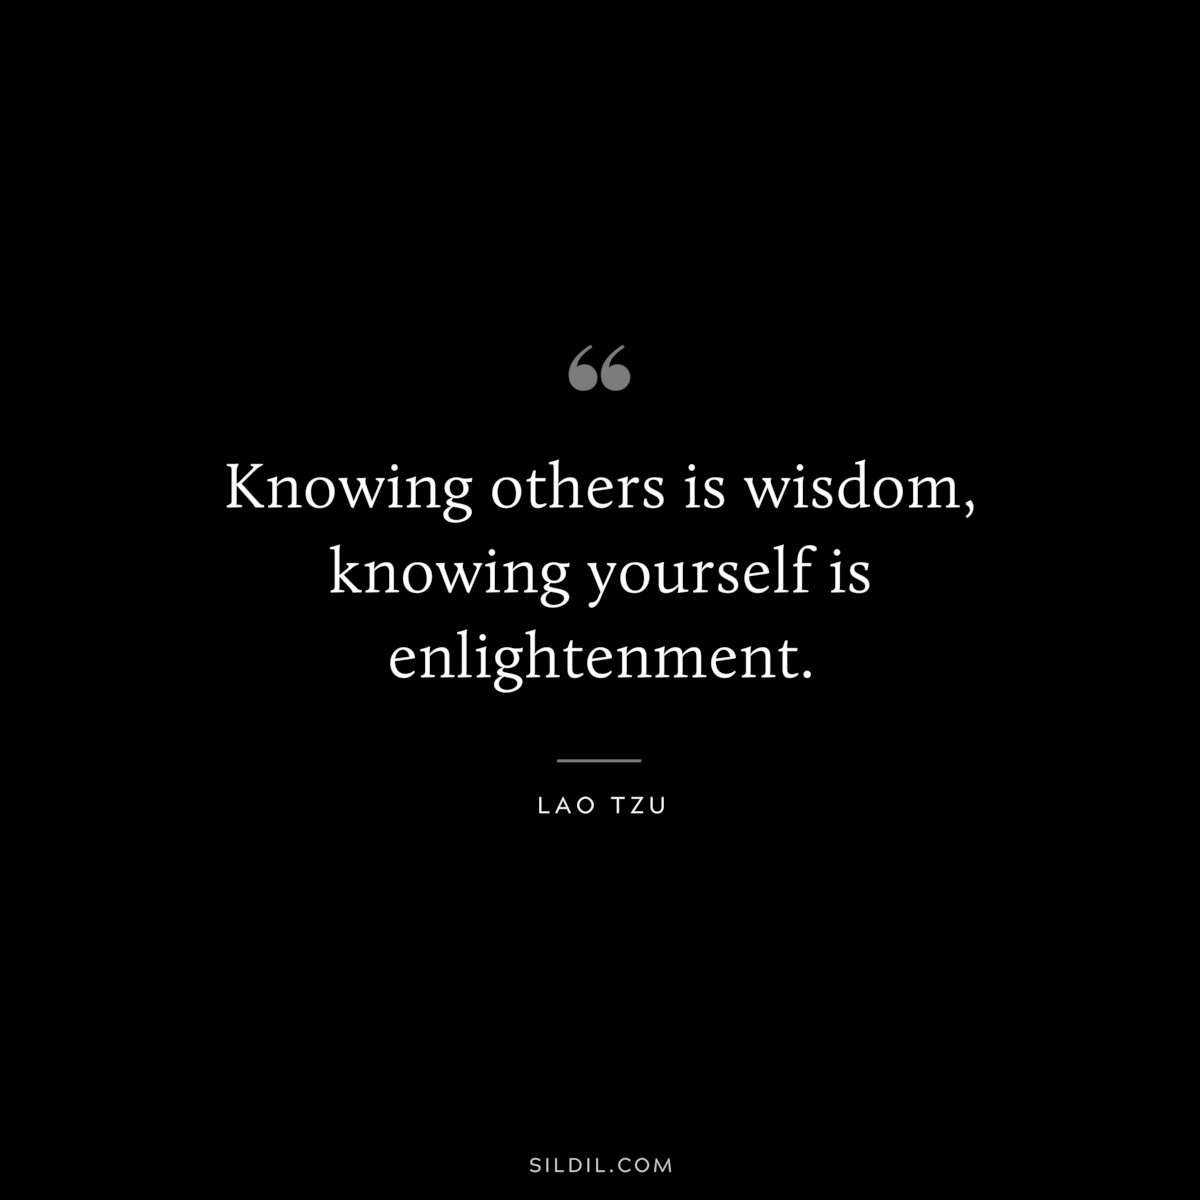 Knowing others is wisdom, knowing yourself is enlightenment. ― Lao Tzu